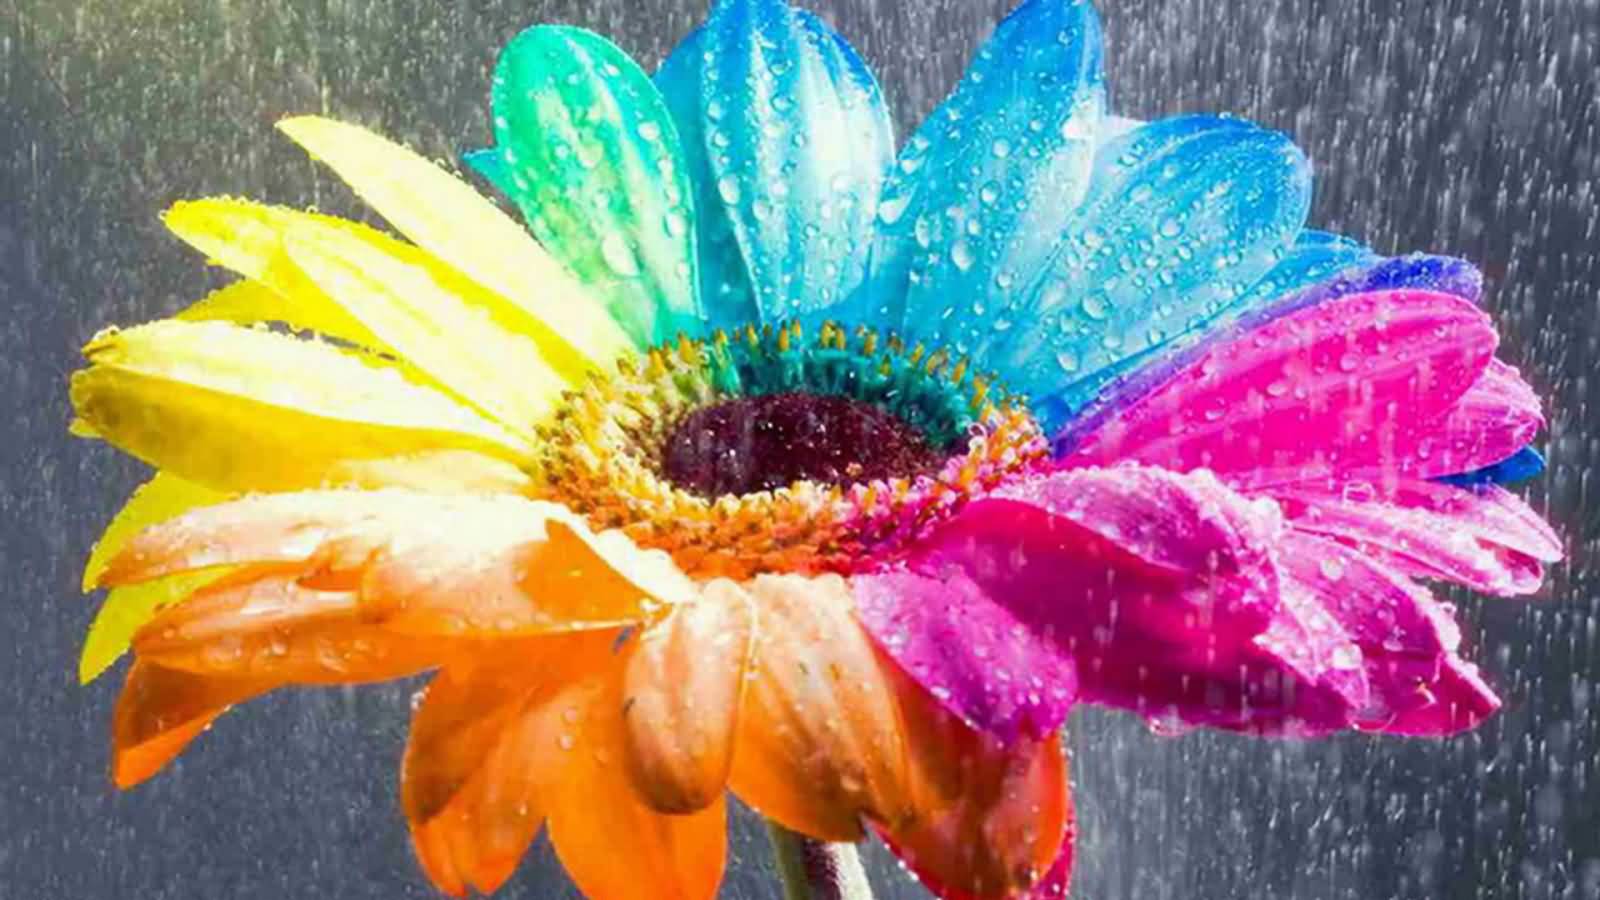 Rainbow Flower With Water Droplets